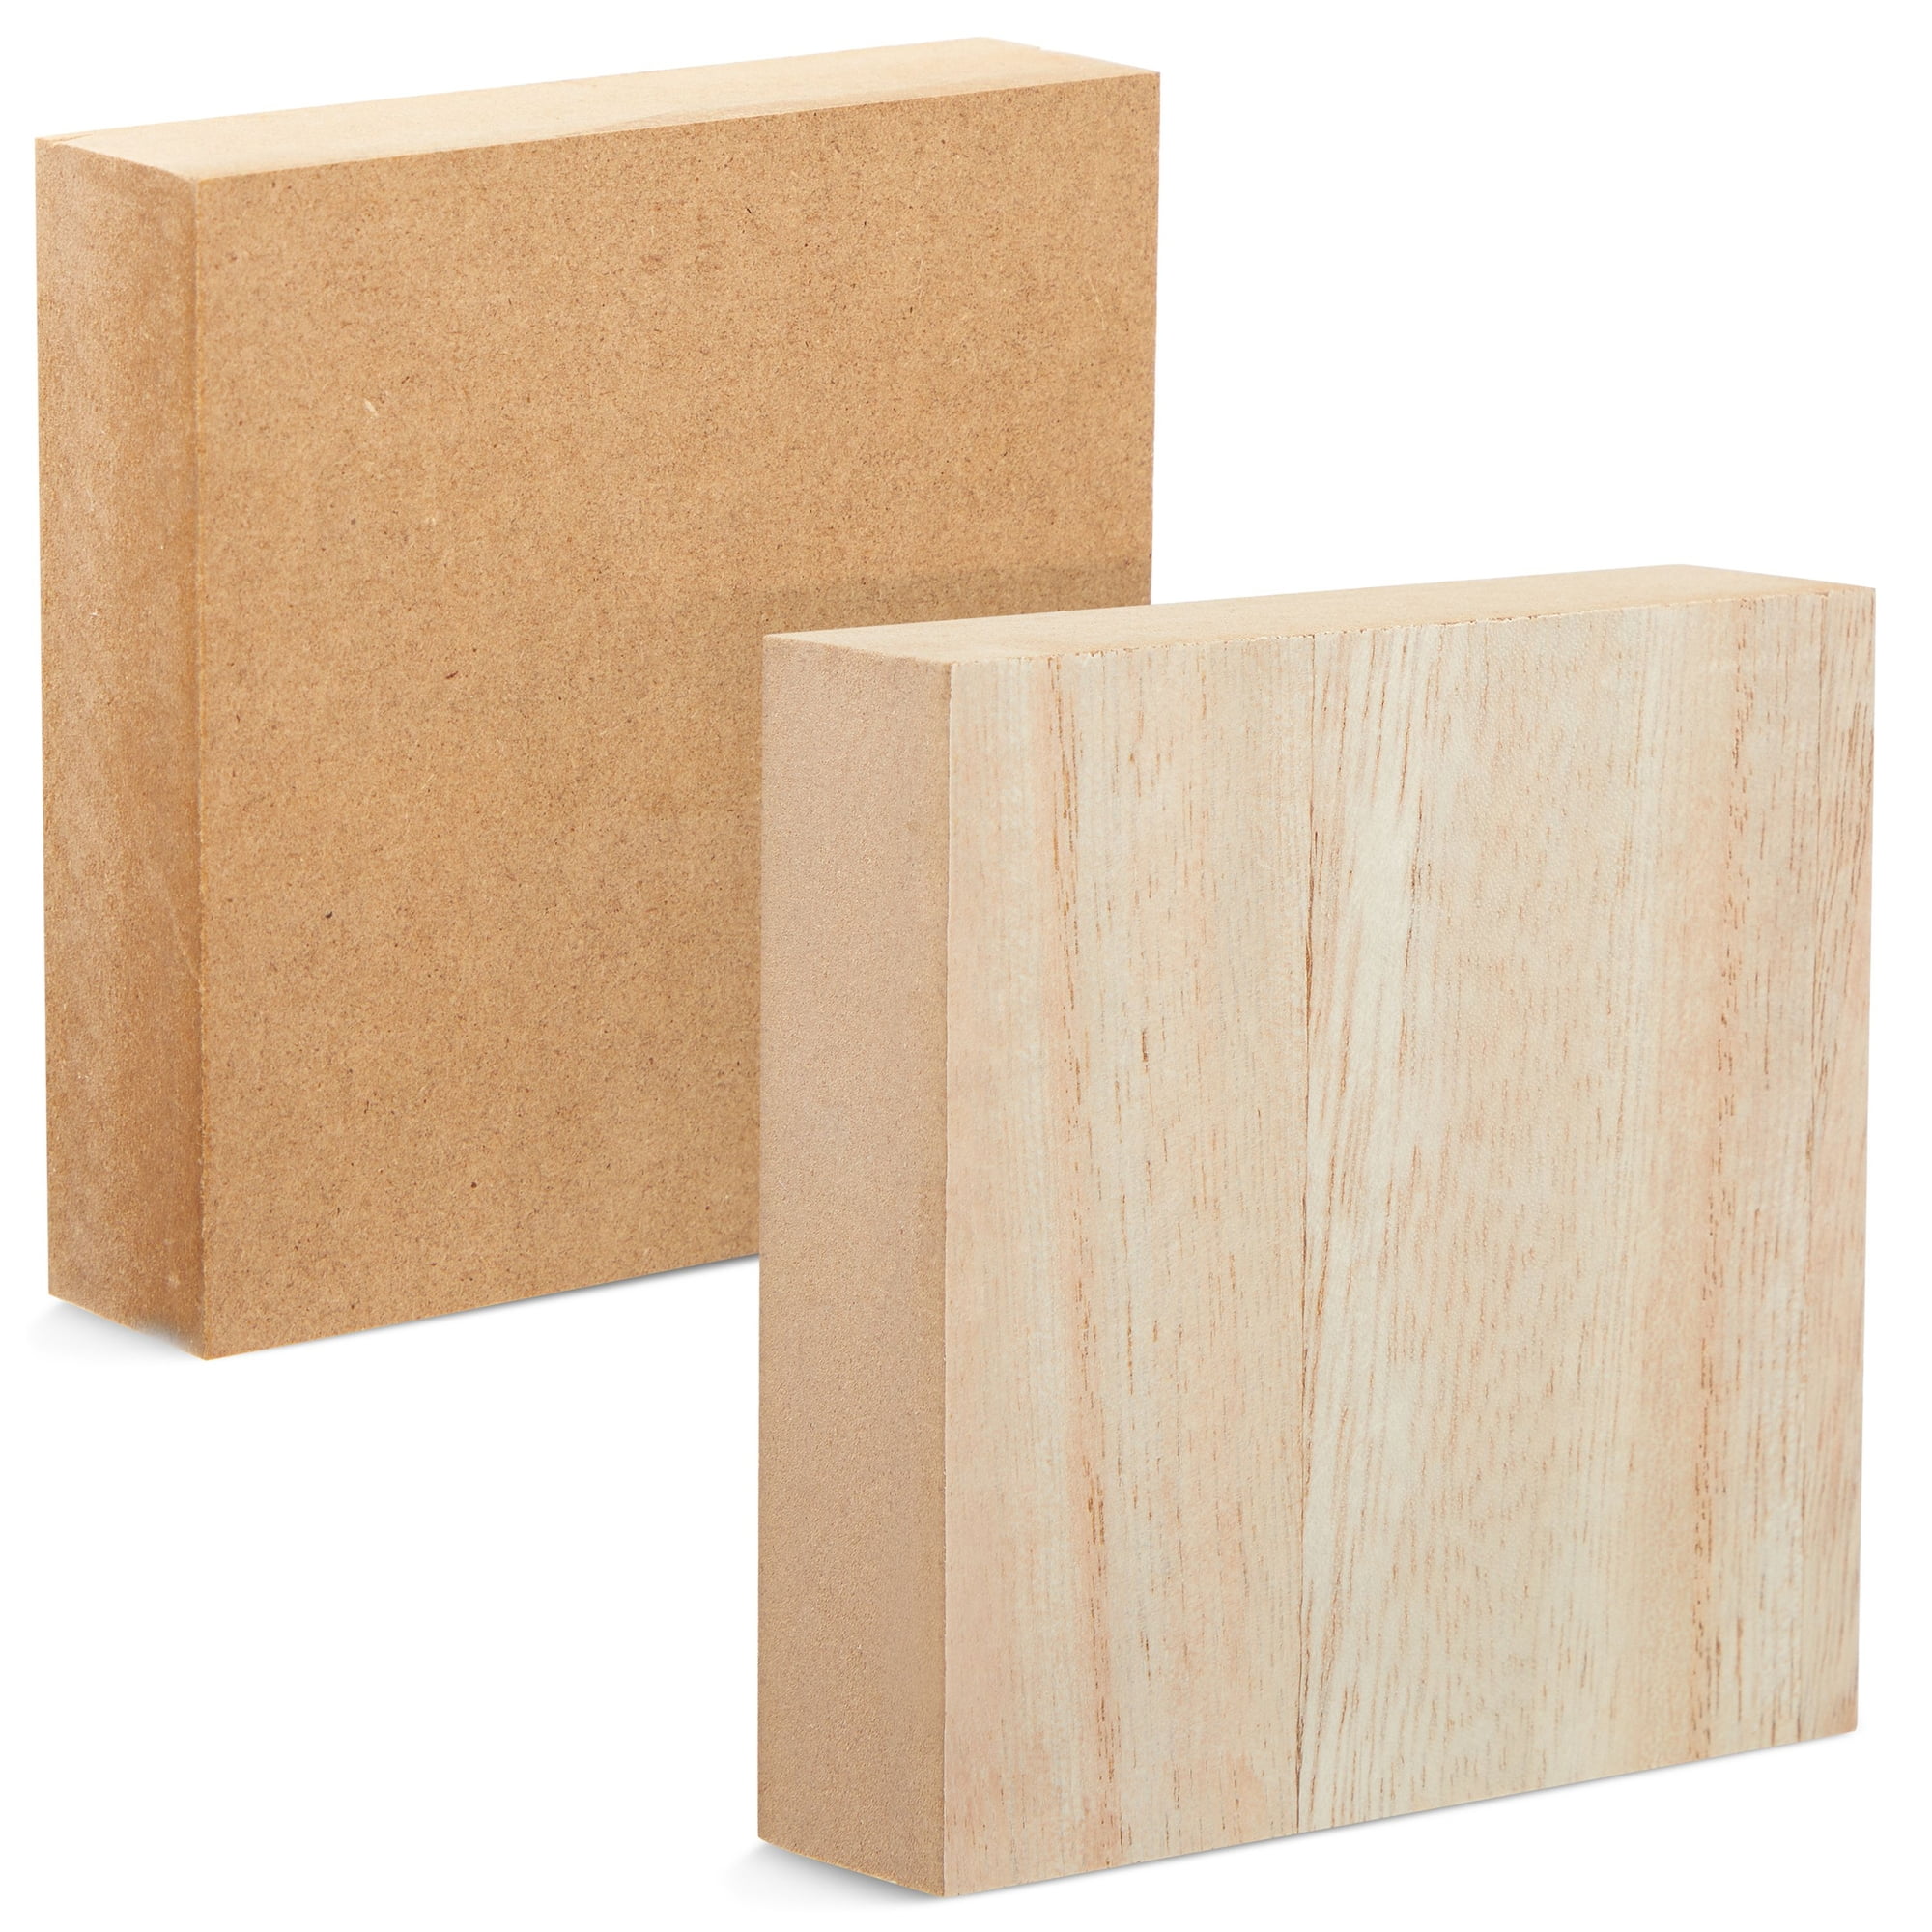  12PCS Unfinished MDF Wood Blocks for Crafts 4x4 inches, 1 Inch  Thick Squares Basswood Carving Blocks, Wooden Cubes Whittling Soft Wood  Carving Block for Arts and Crafts and DIY Projects